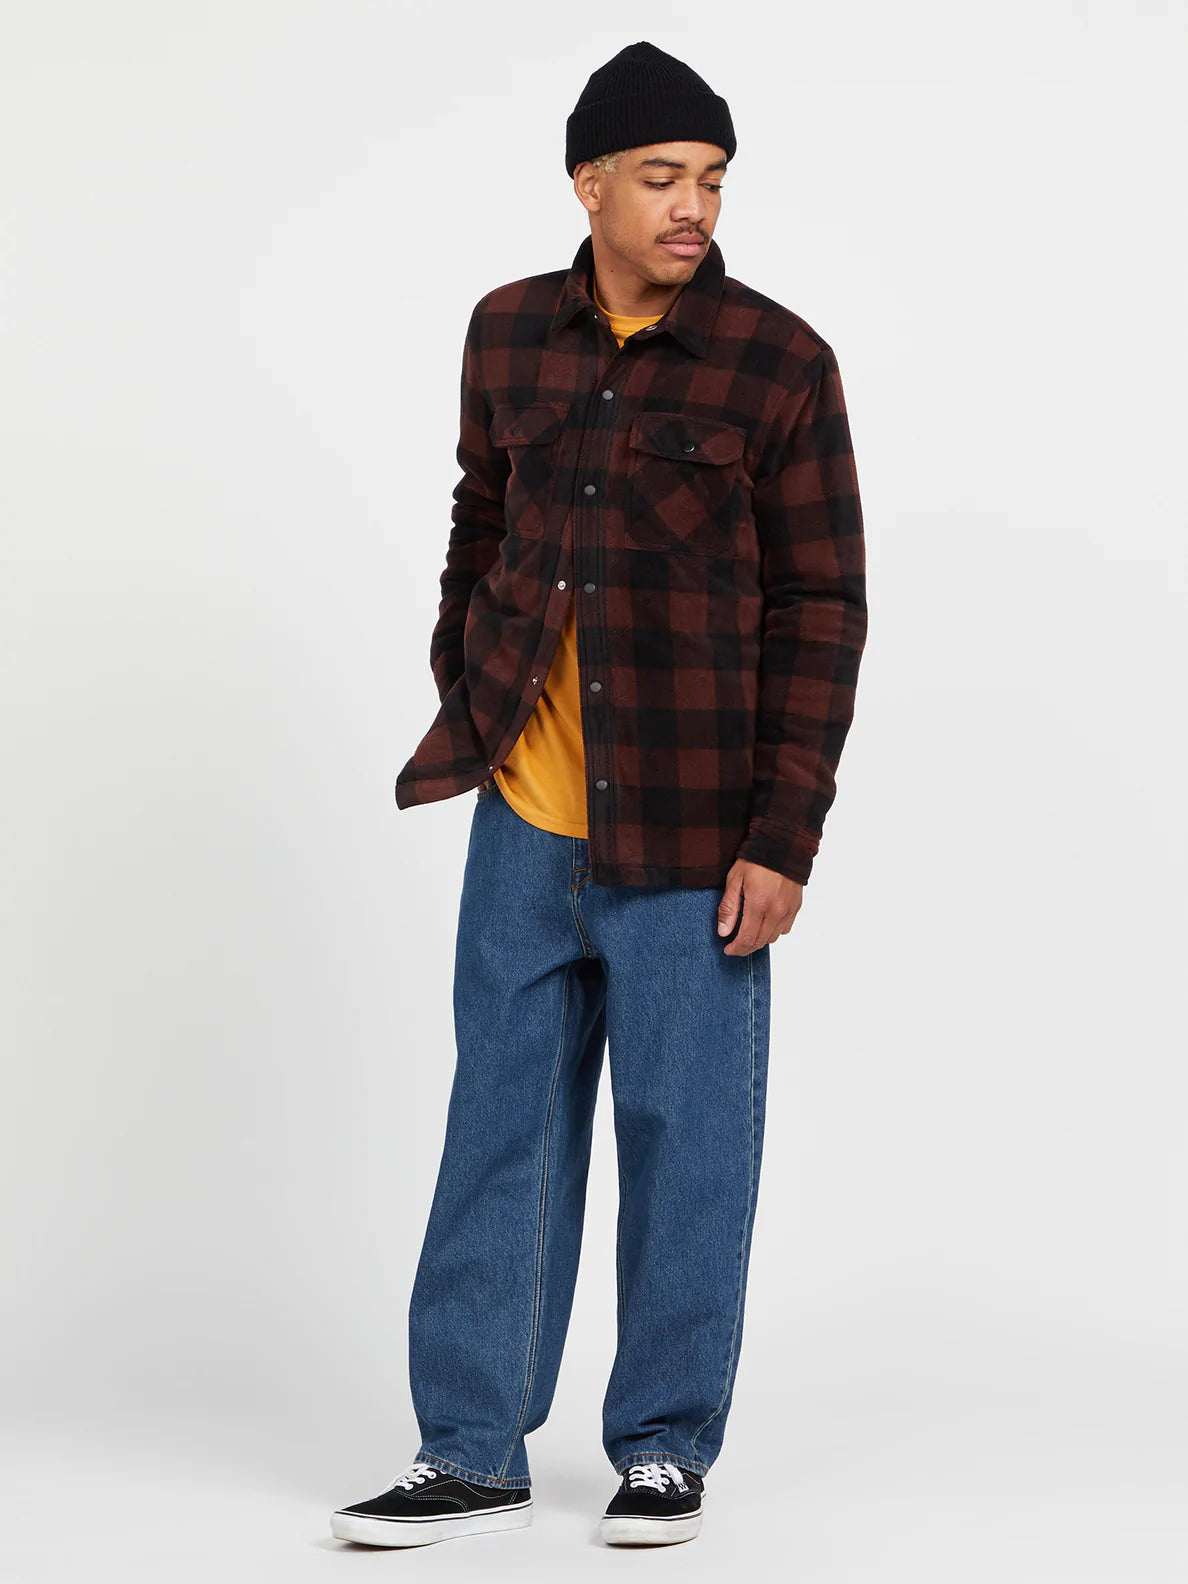 Billow Loose Tapered Fit Jeans